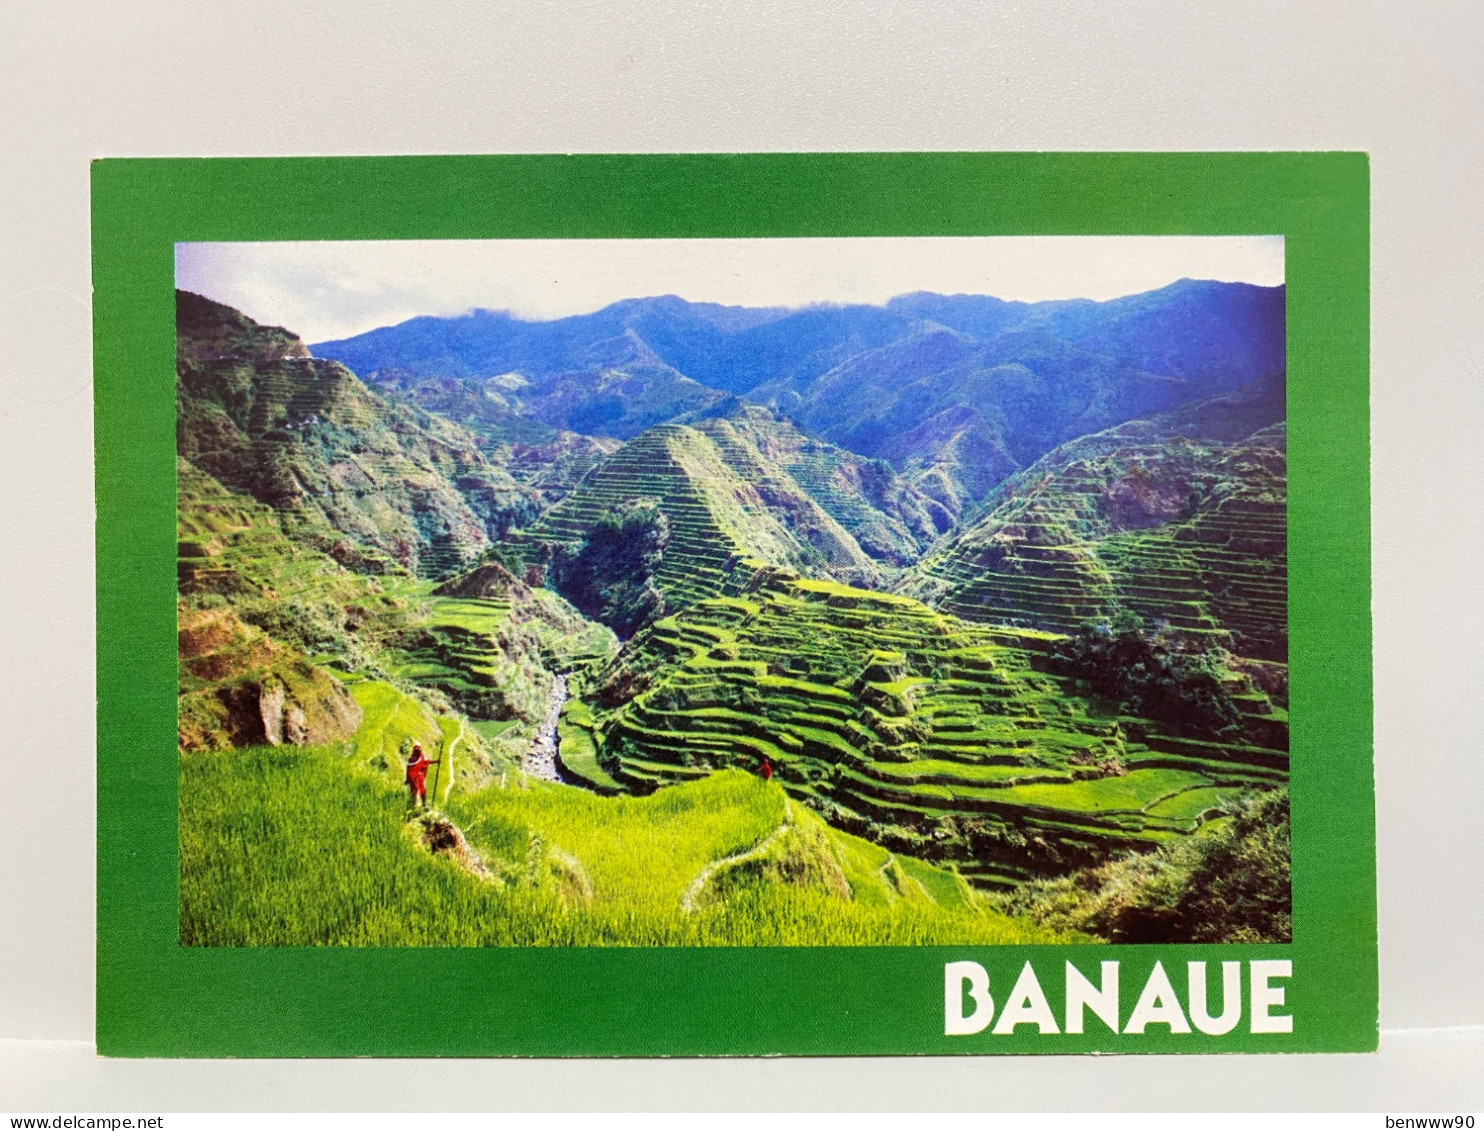 Banaue RICE TERRACES The Mountain Tribes PHILIPPINES Postcard - Philippines